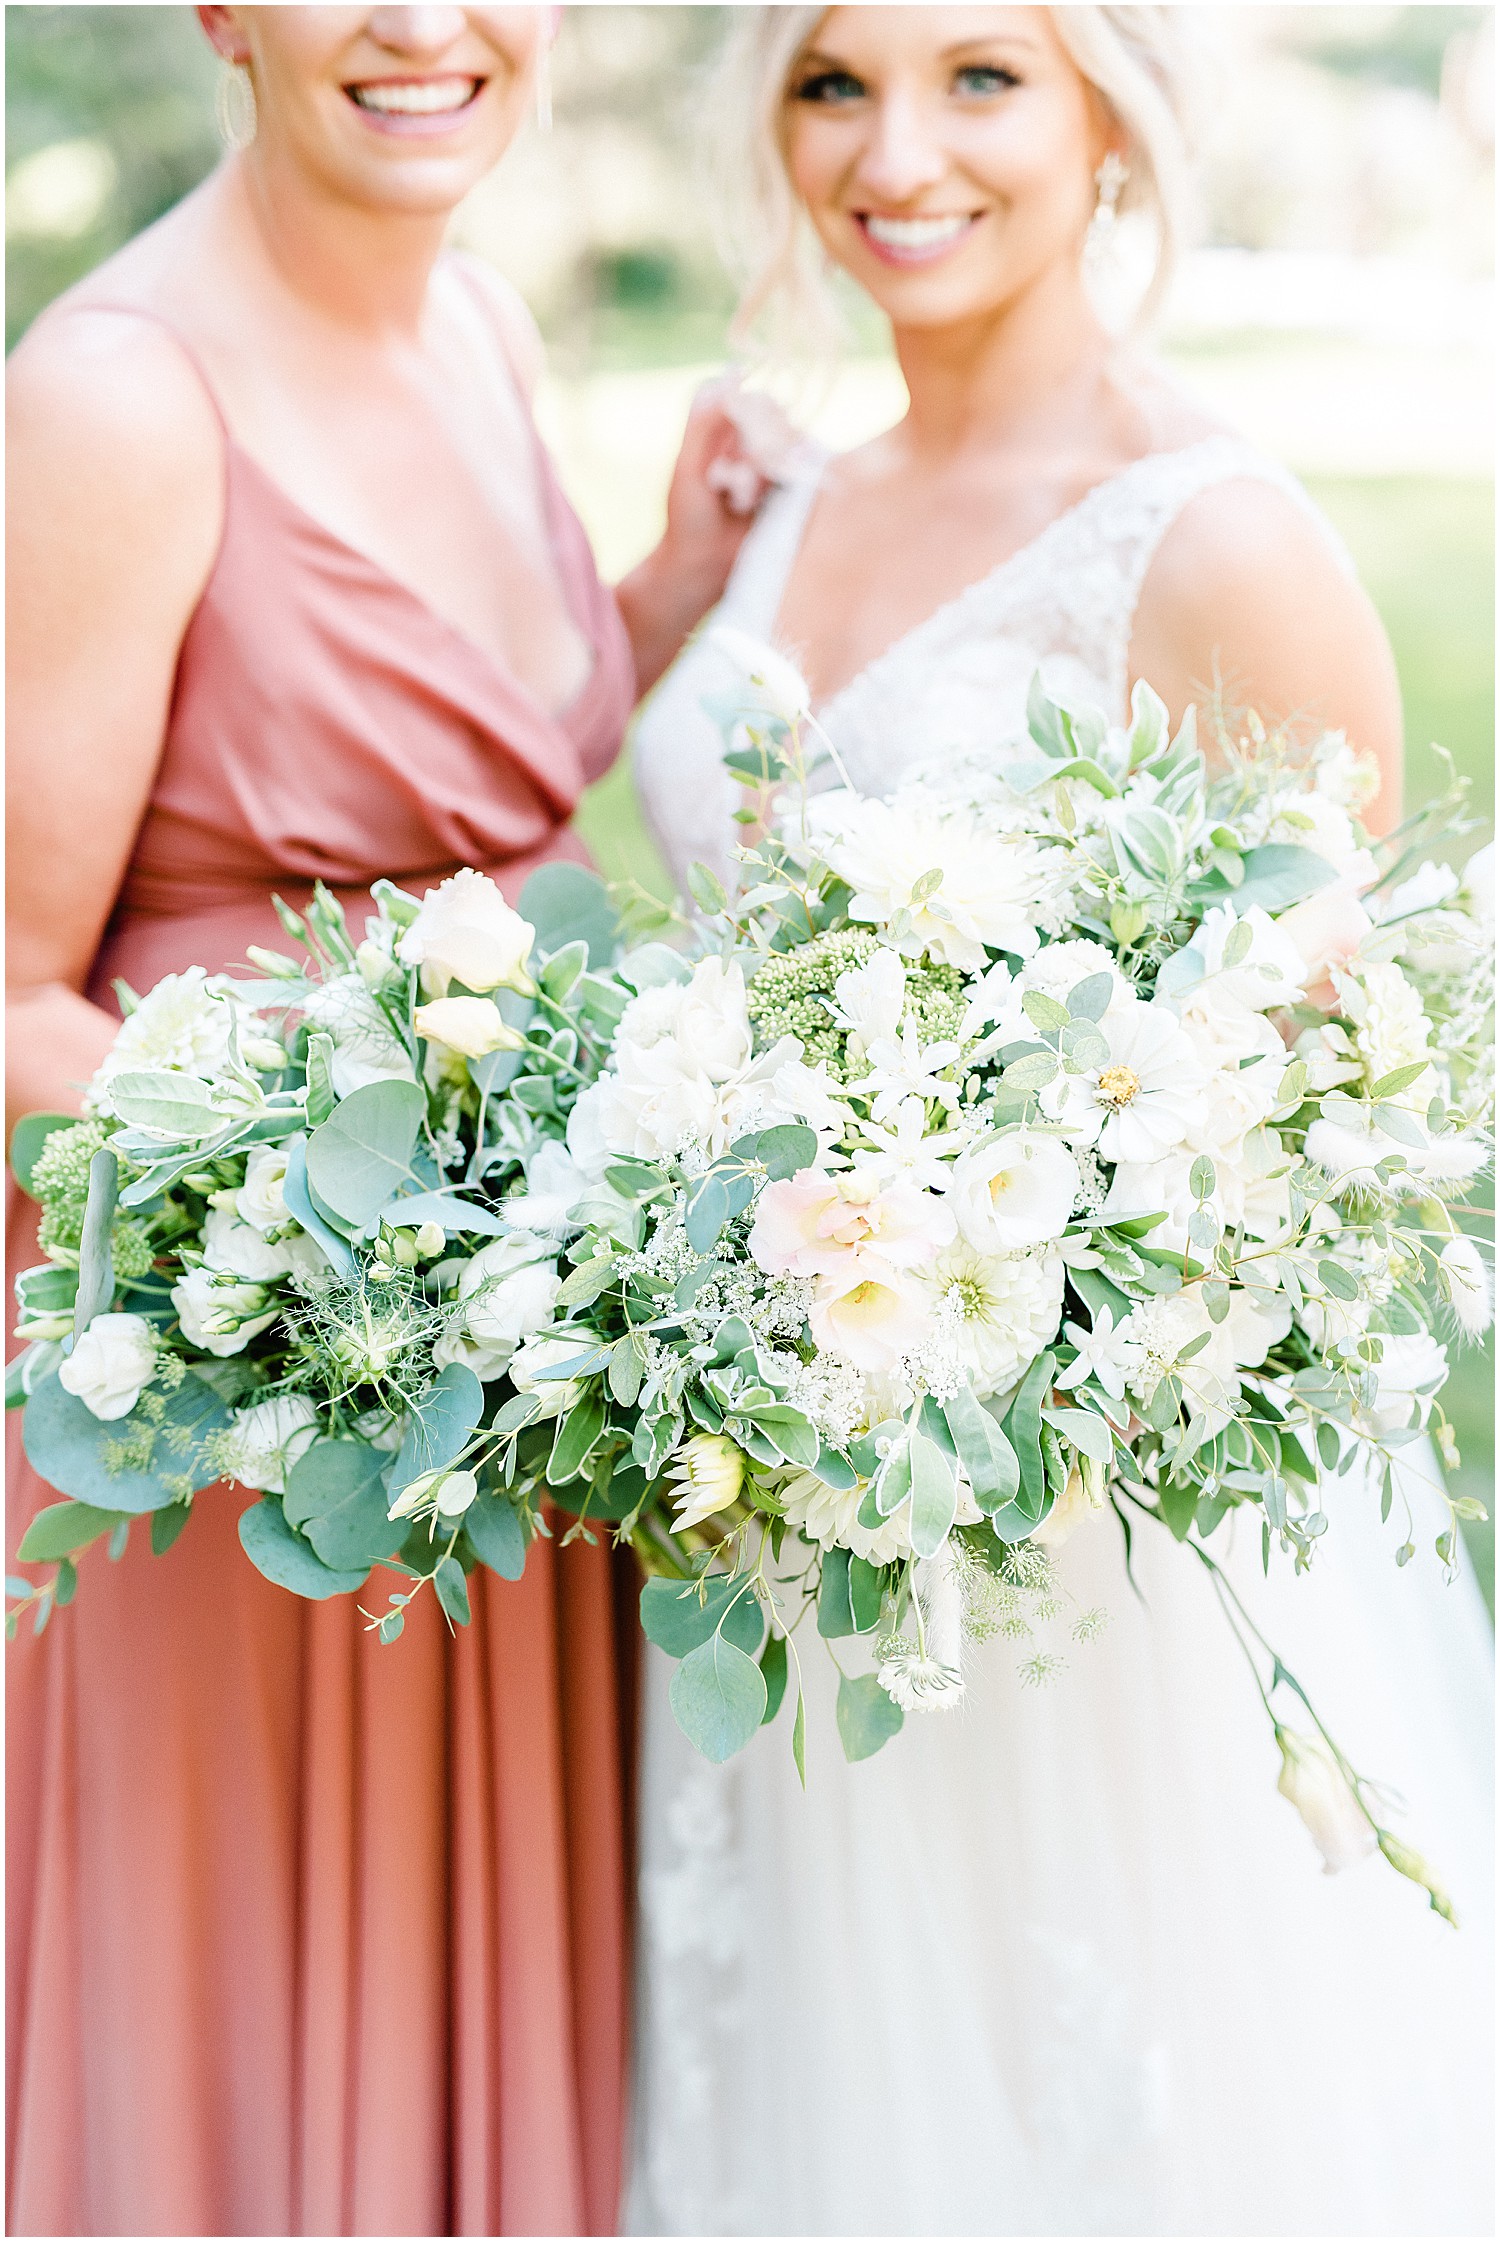 bouquet details of bride and bridesmaid during wedding party portraits